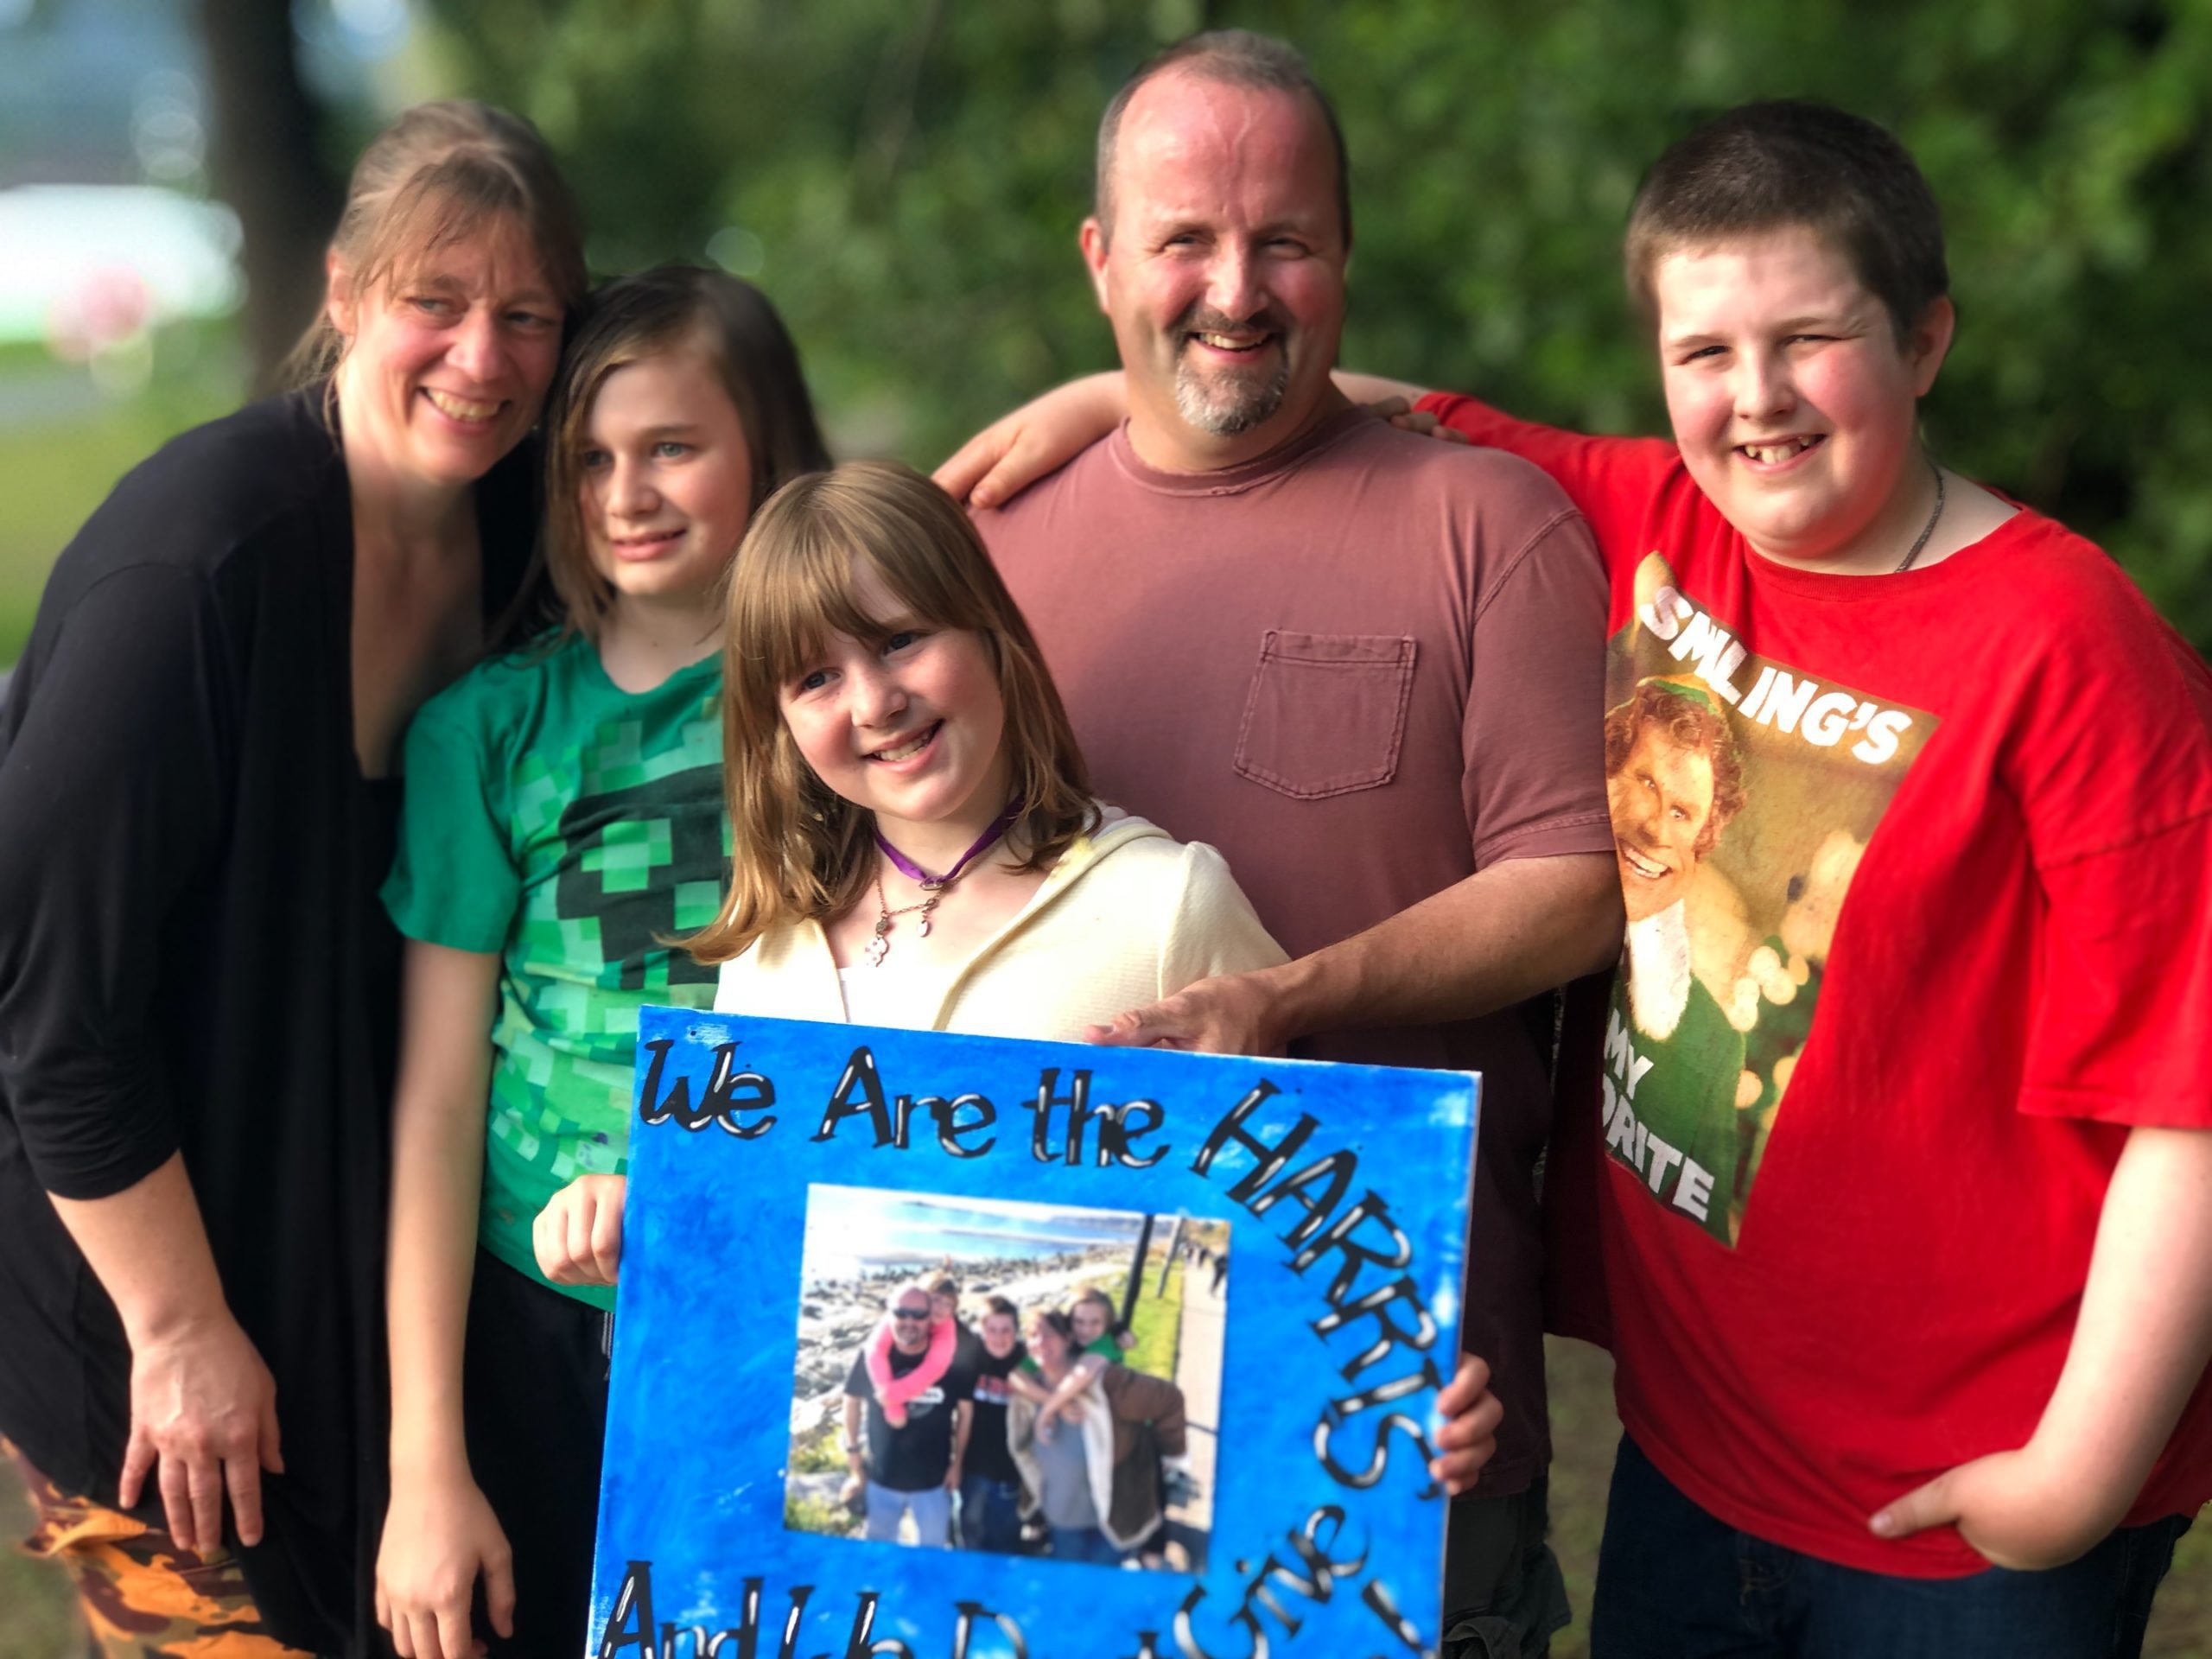 Cheryl Harris with her husband, son and two daughters holding a picture while taking a picture